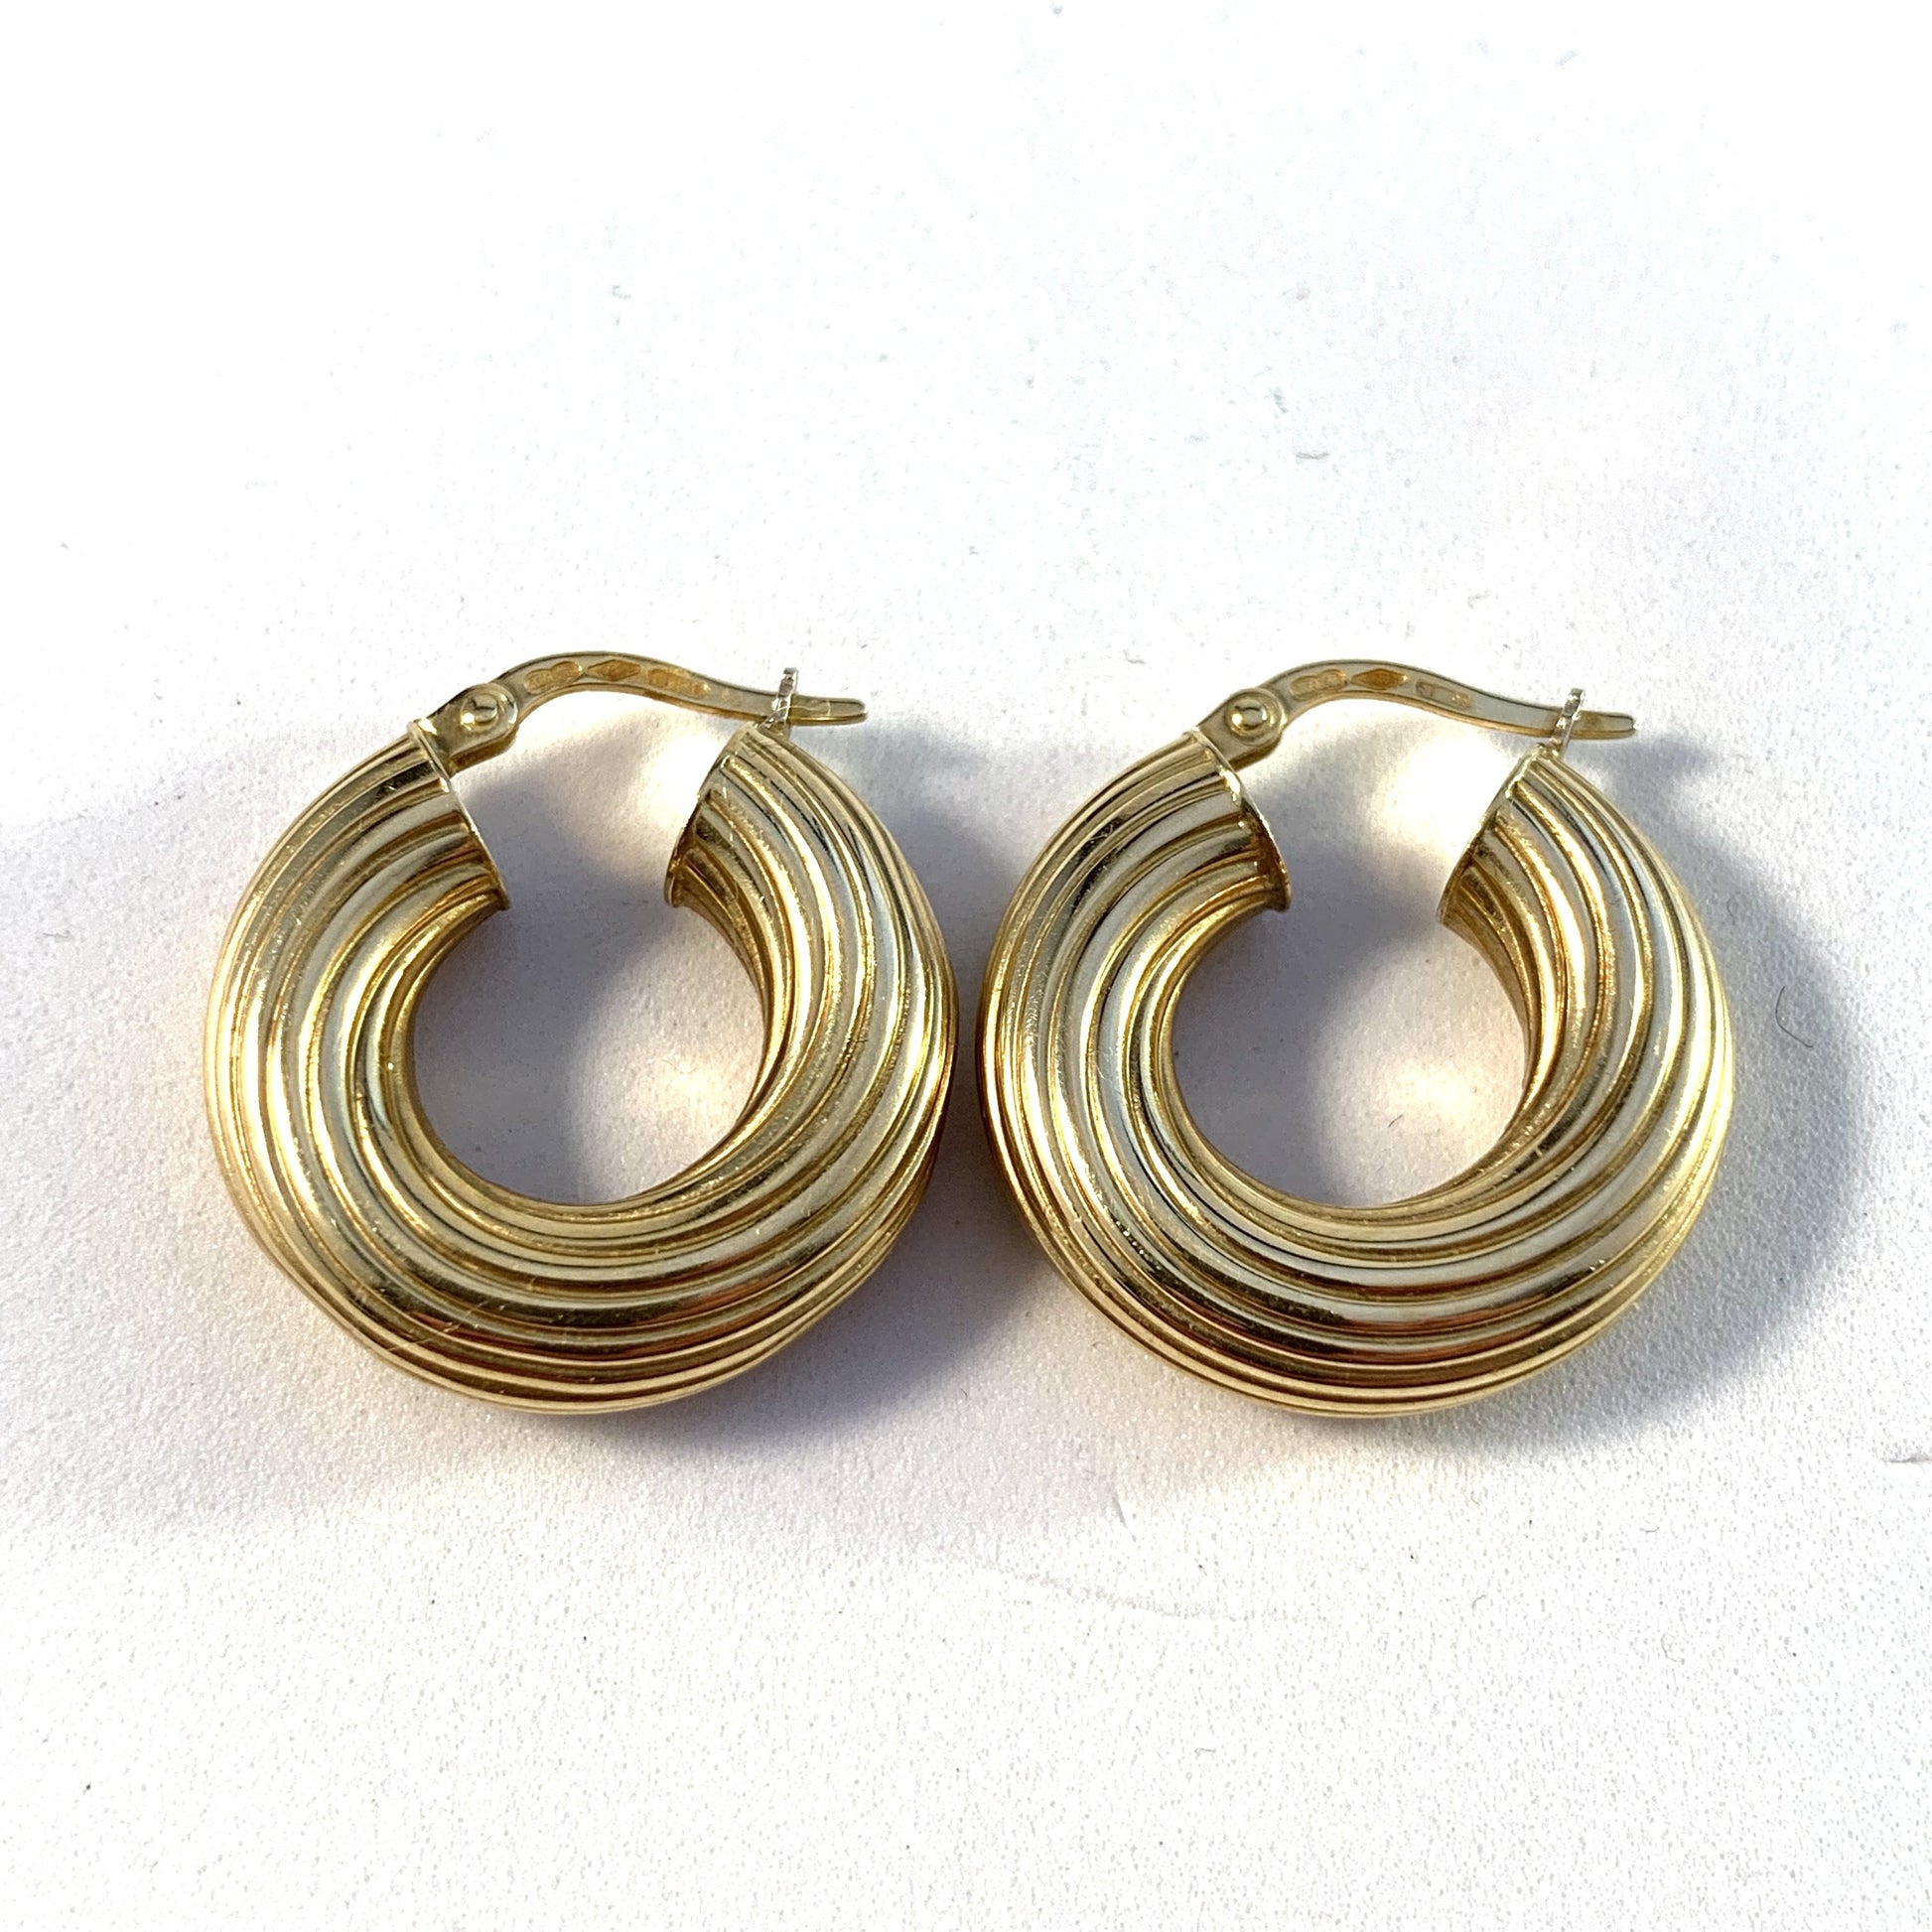 UNO A ERRE, Arezzo, Italy gold earrings